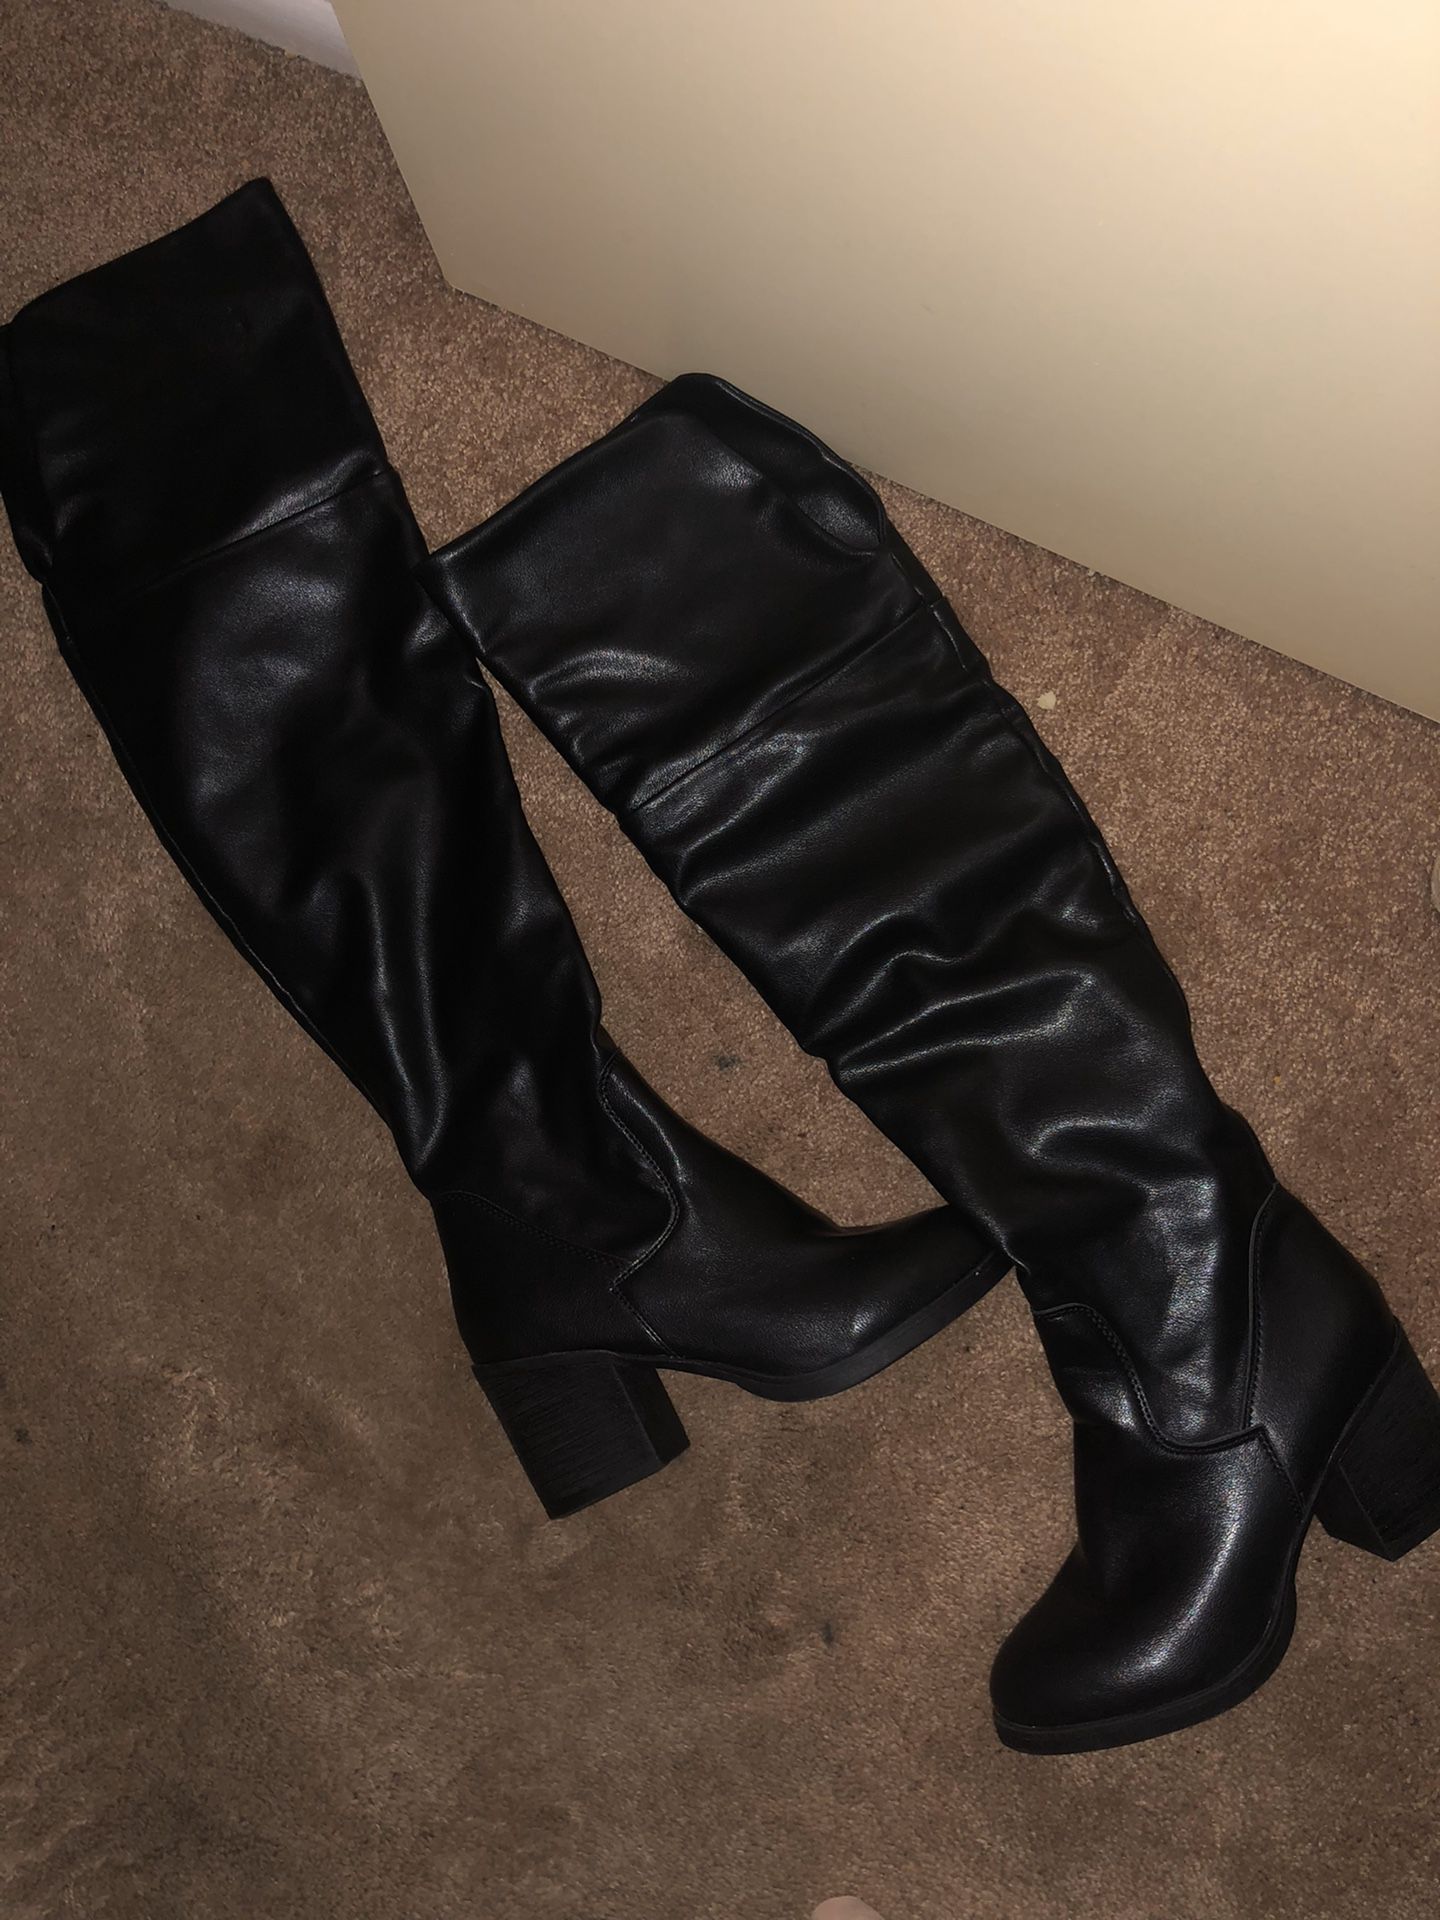 Size 7 leather boots from aldo